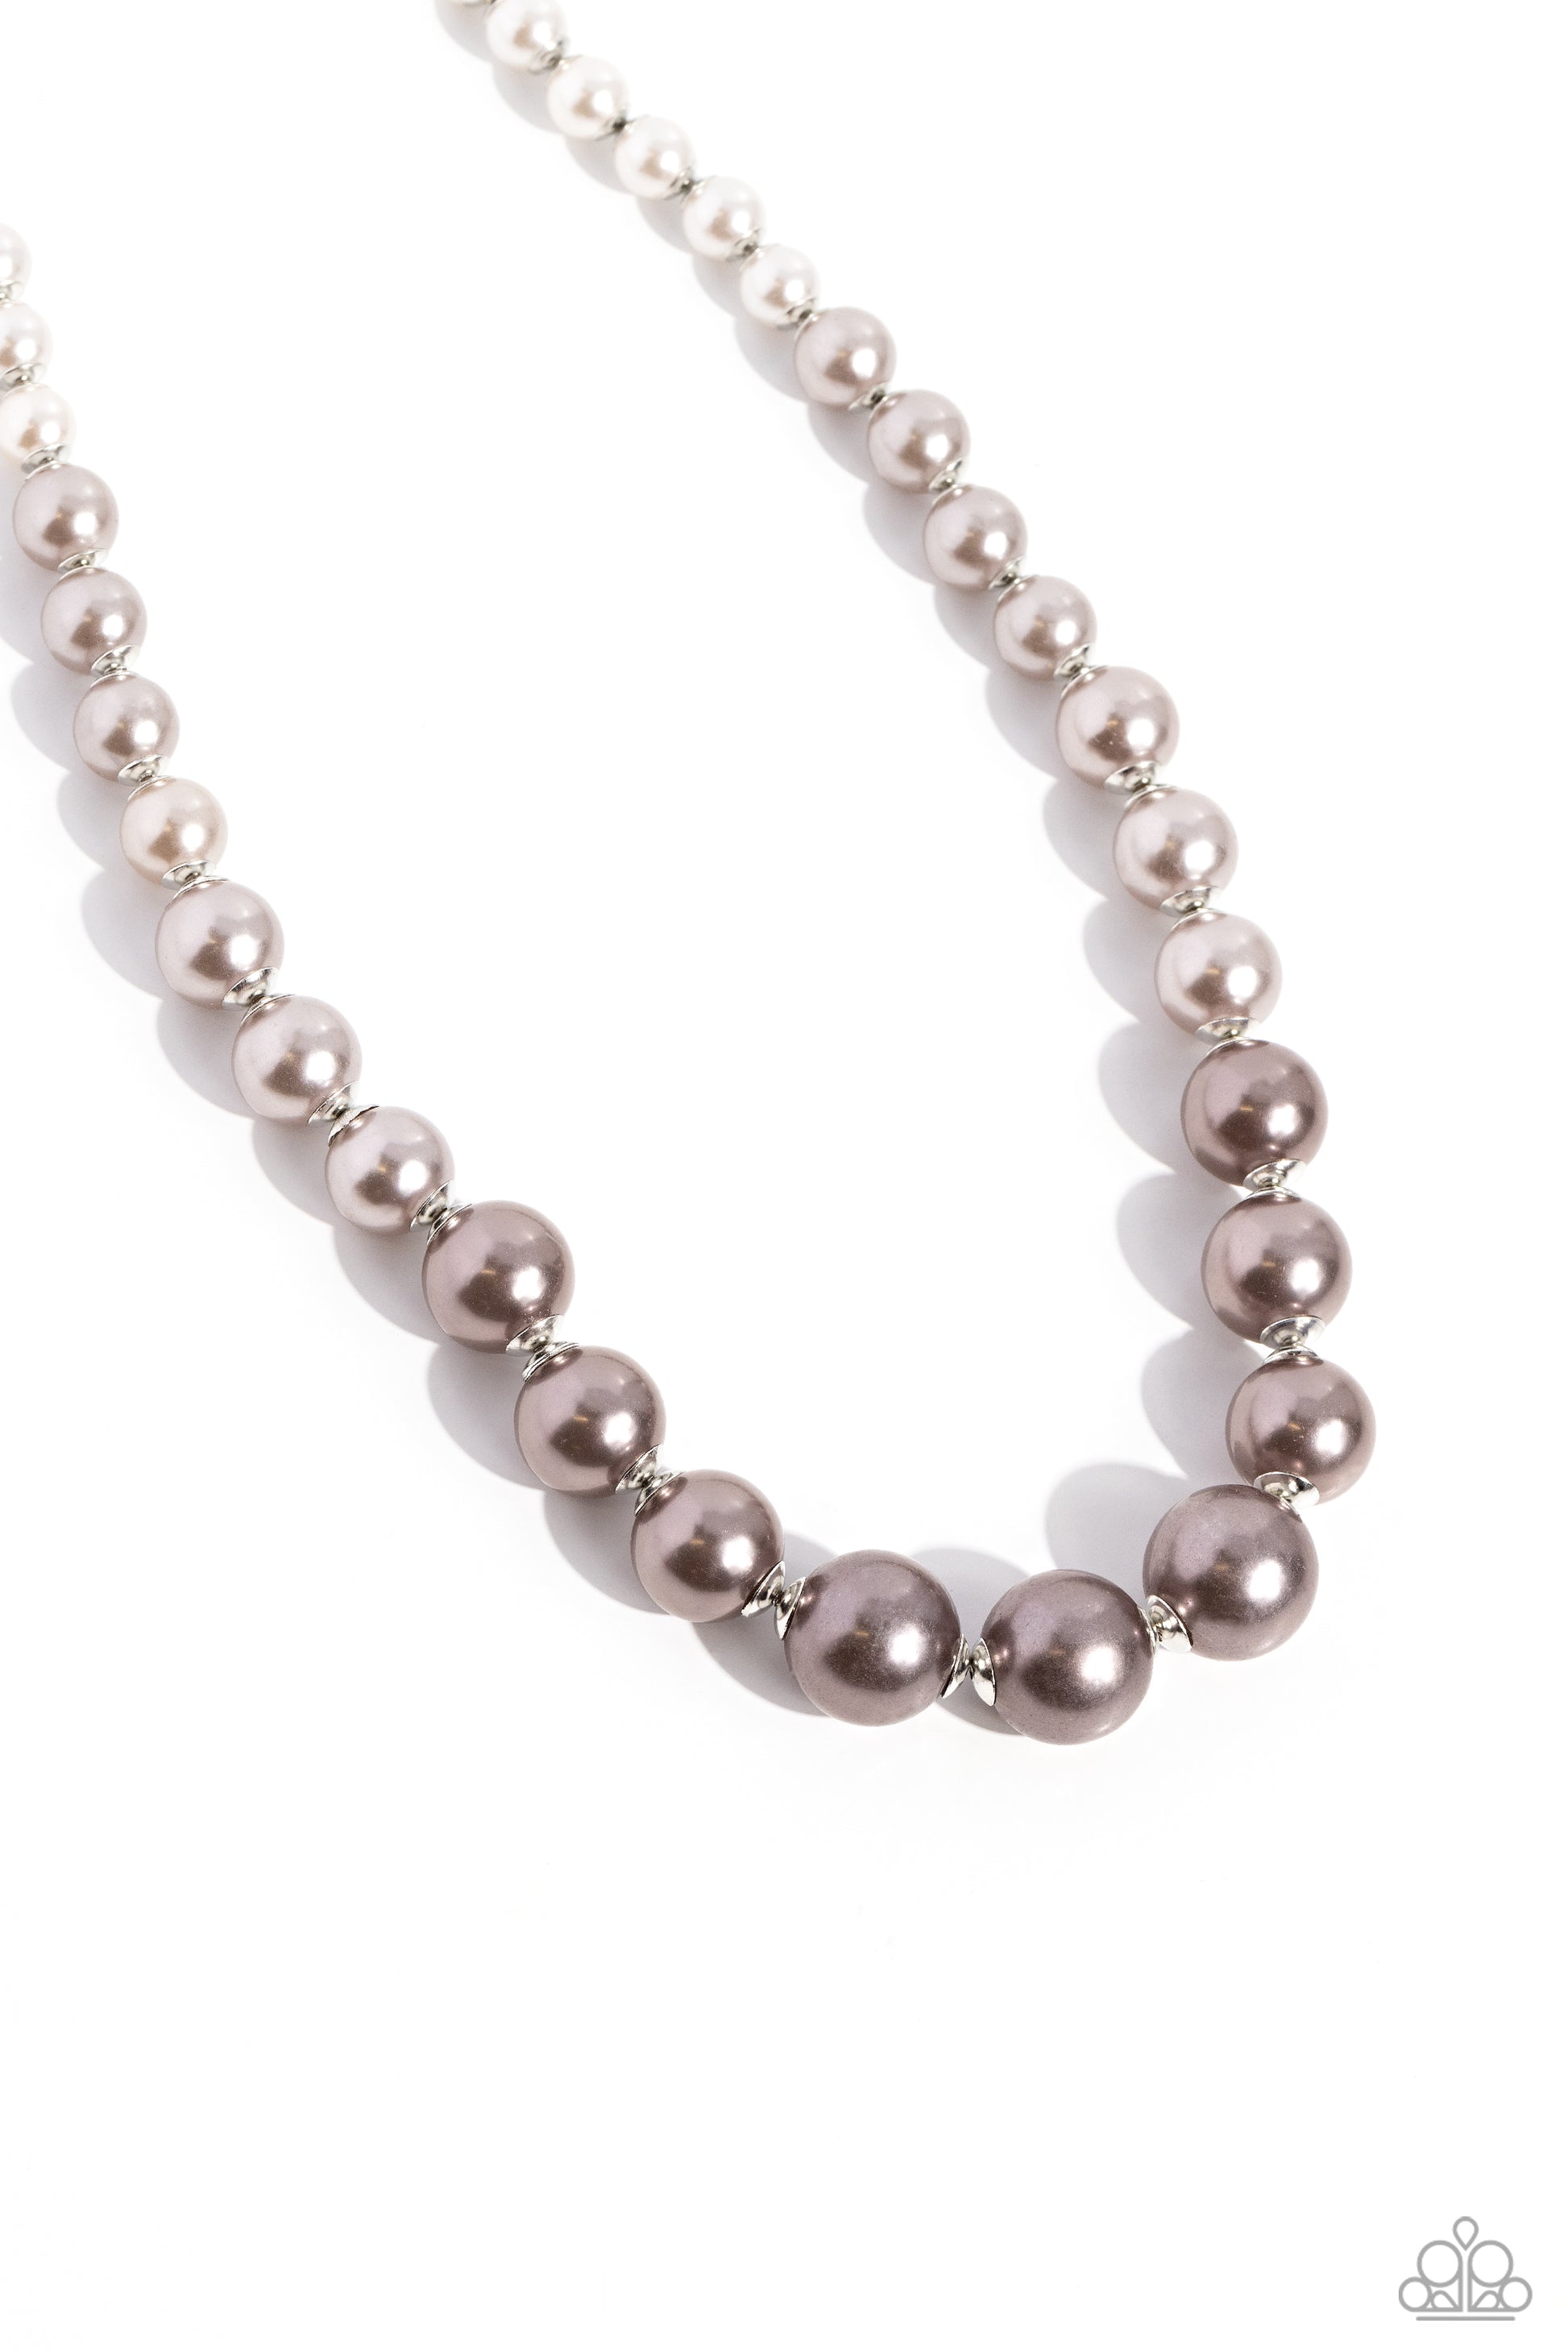 Paparazzi Accessories Manhattan Mogul - Multi A single strand of white, silver, and dark gray pearls elegantly cascades below the collar, creating a glamorous ombre effect. Features an adjustable clasp closure. Sold as one individual necklace. Includes on